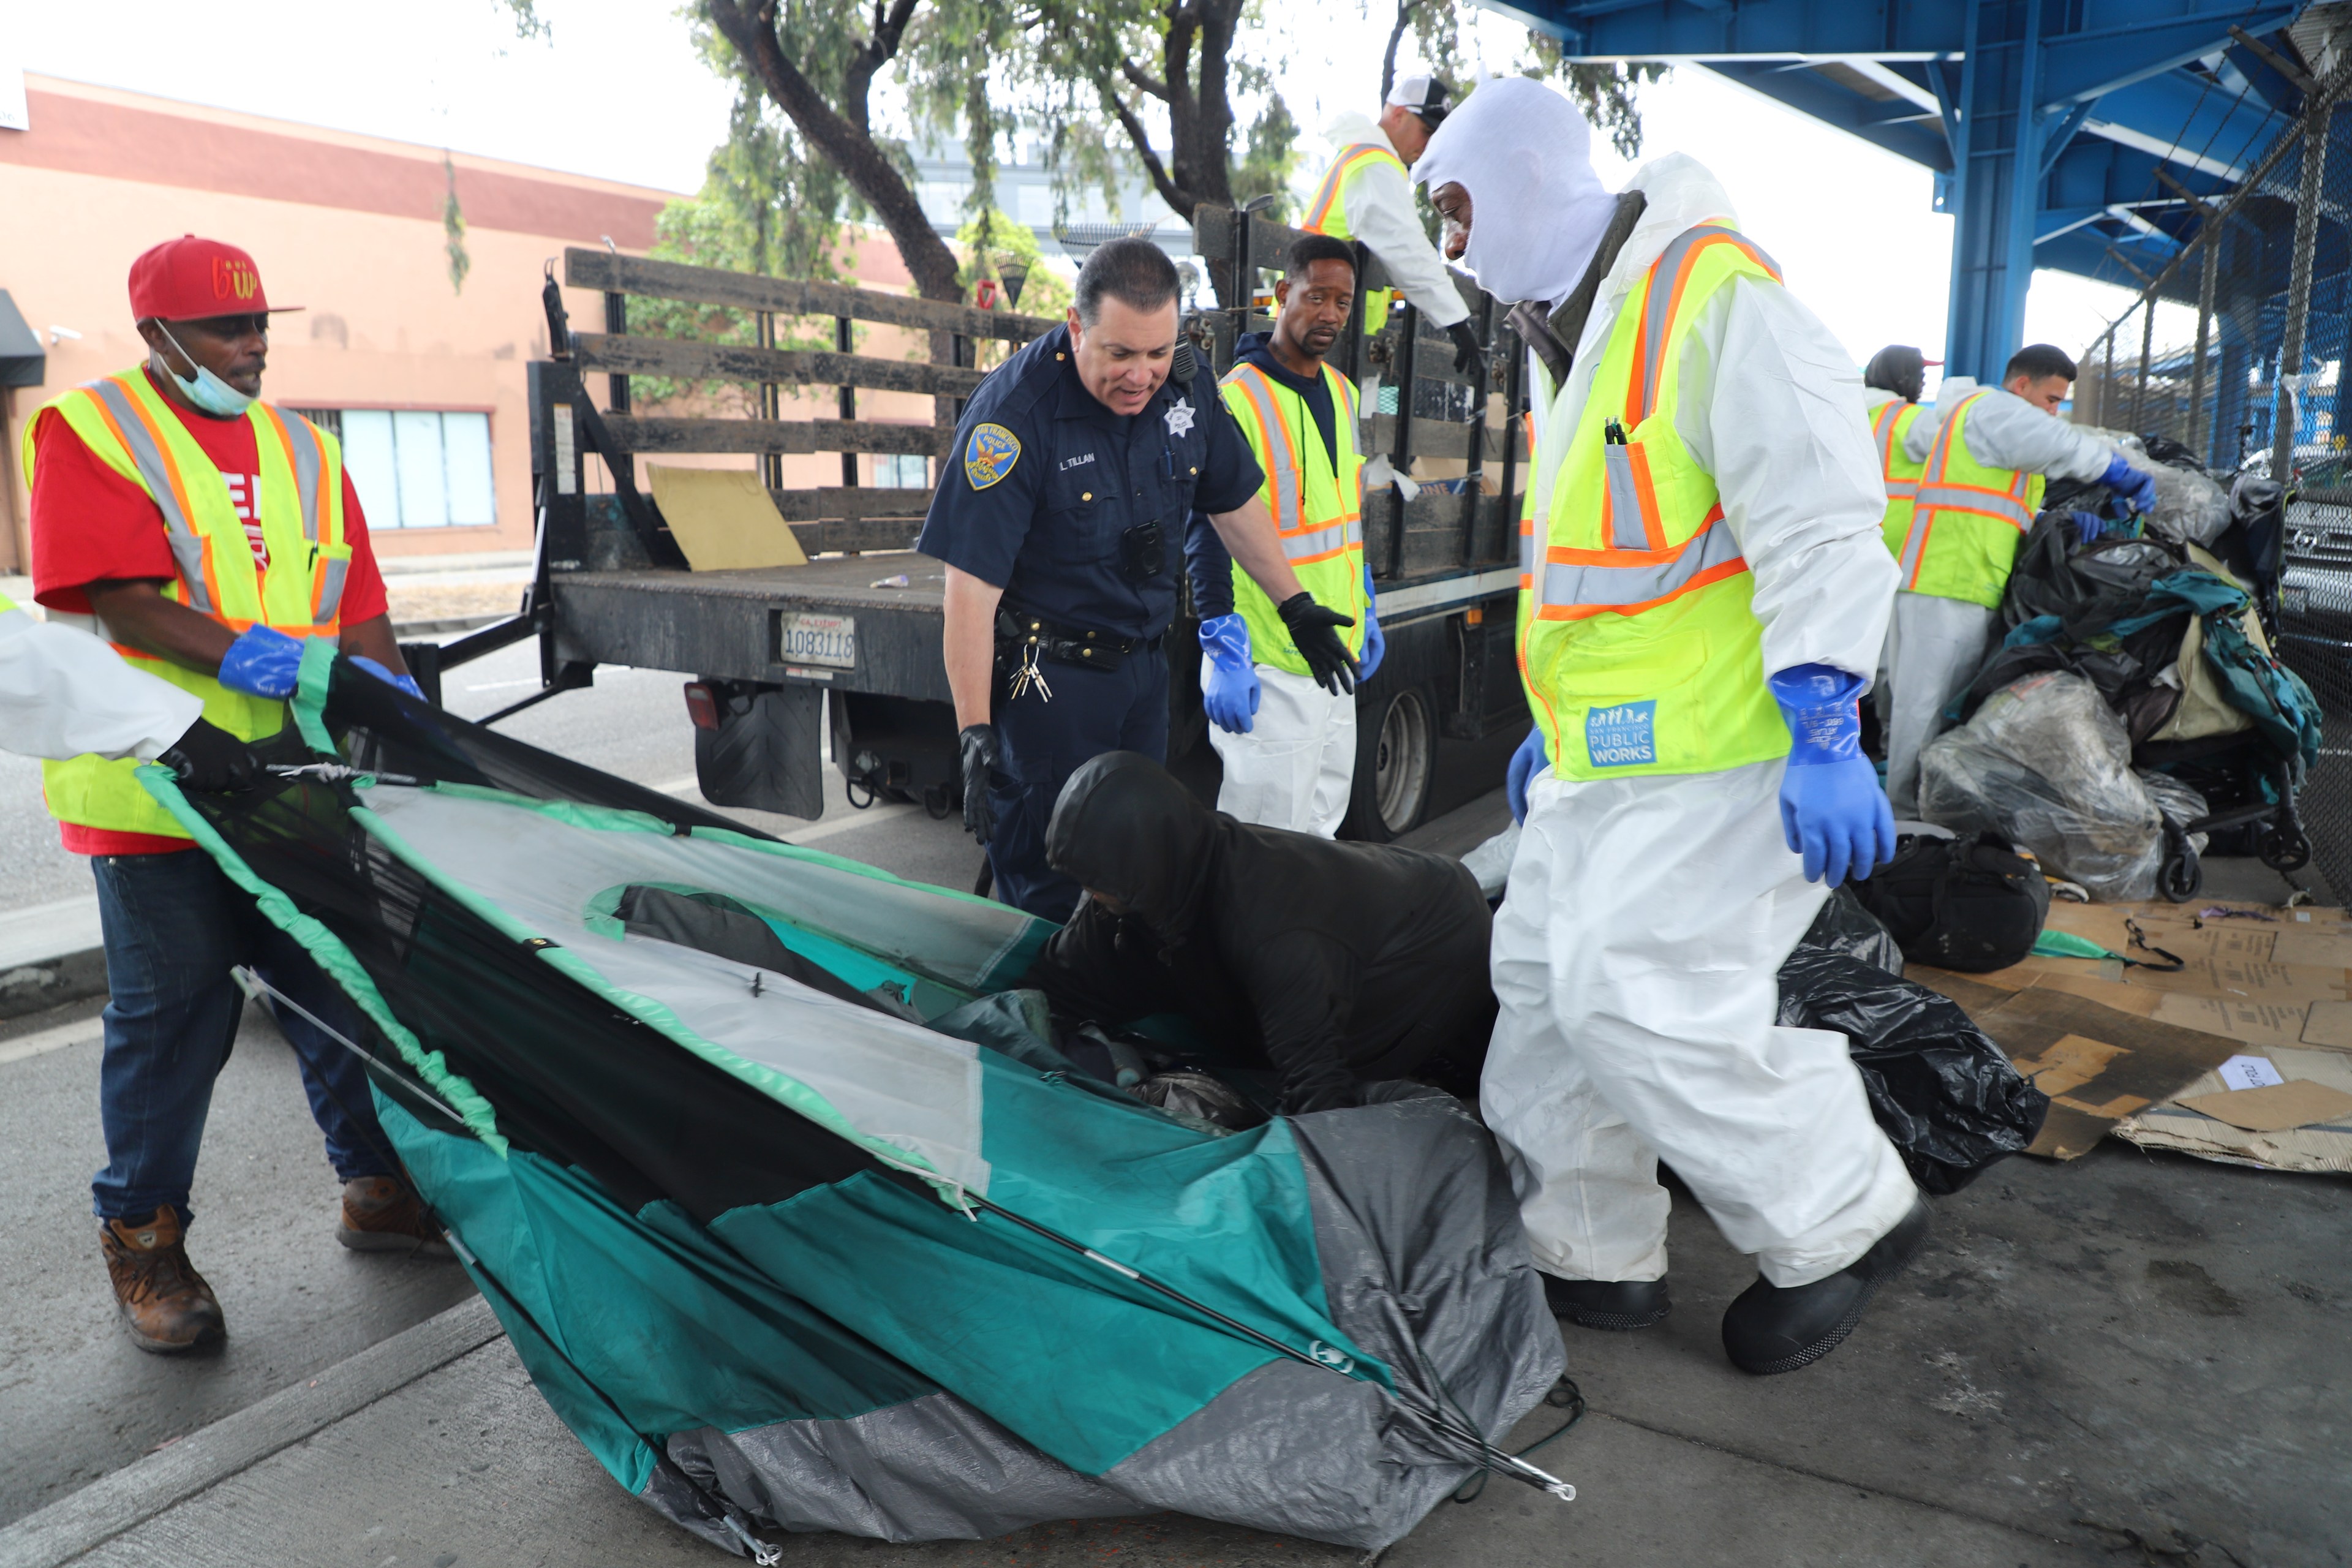 Several workers in protective suits and a police officer assist a person in dismantling a tent under a bridge, with a truck and other workers in the background.